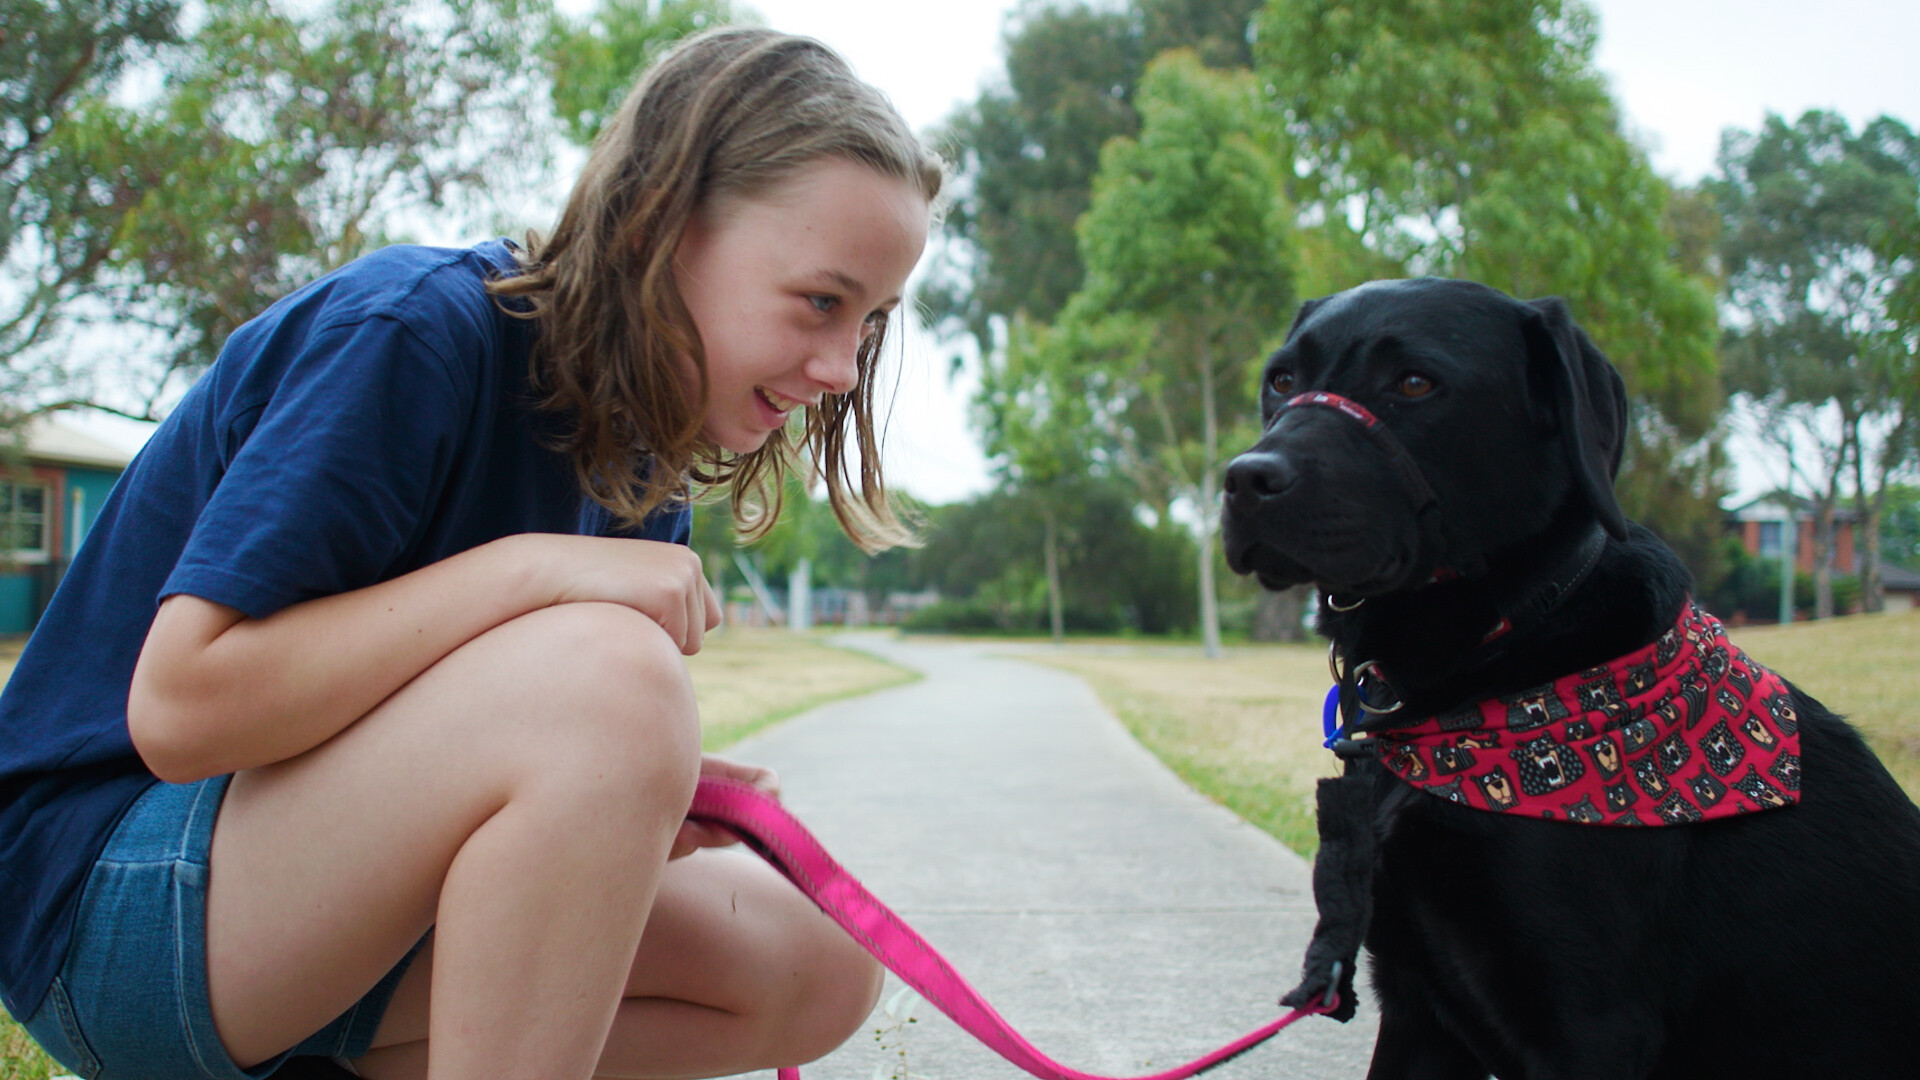 Shiloh and Labrador Indie, one of the wonderful therapy dogs in Australia helping kids: for Animal Friendly Life